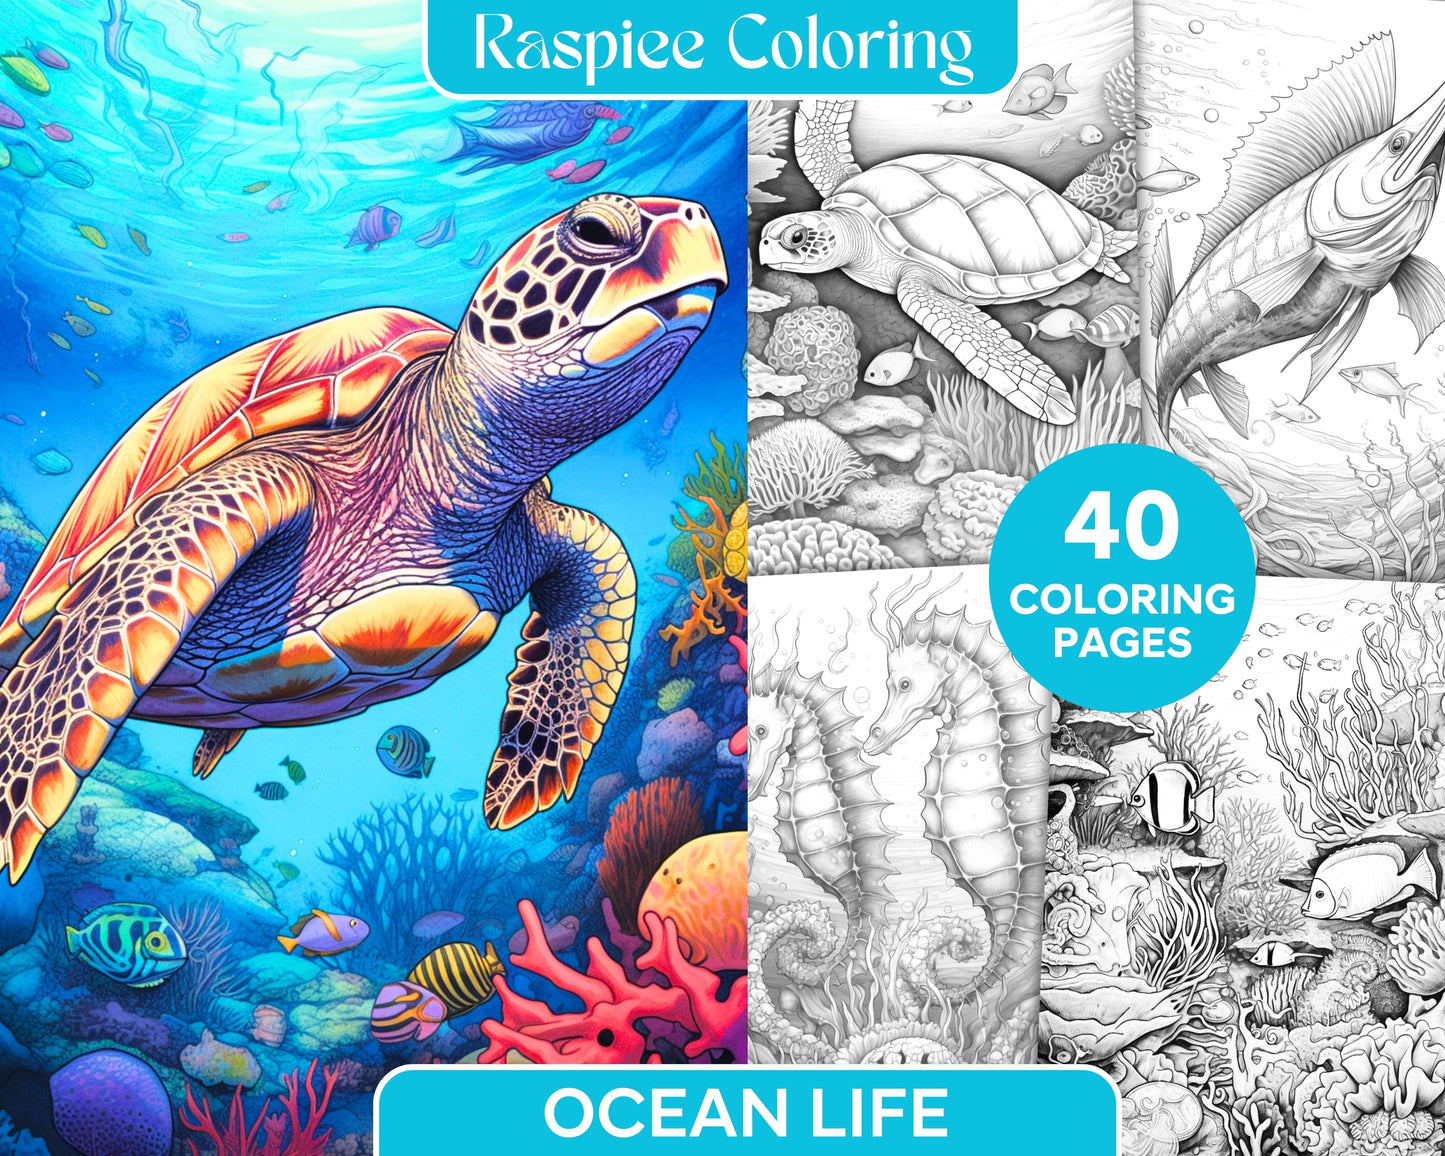 Ocean life grayscale coloring pages printable for adults relaxation an â coloring